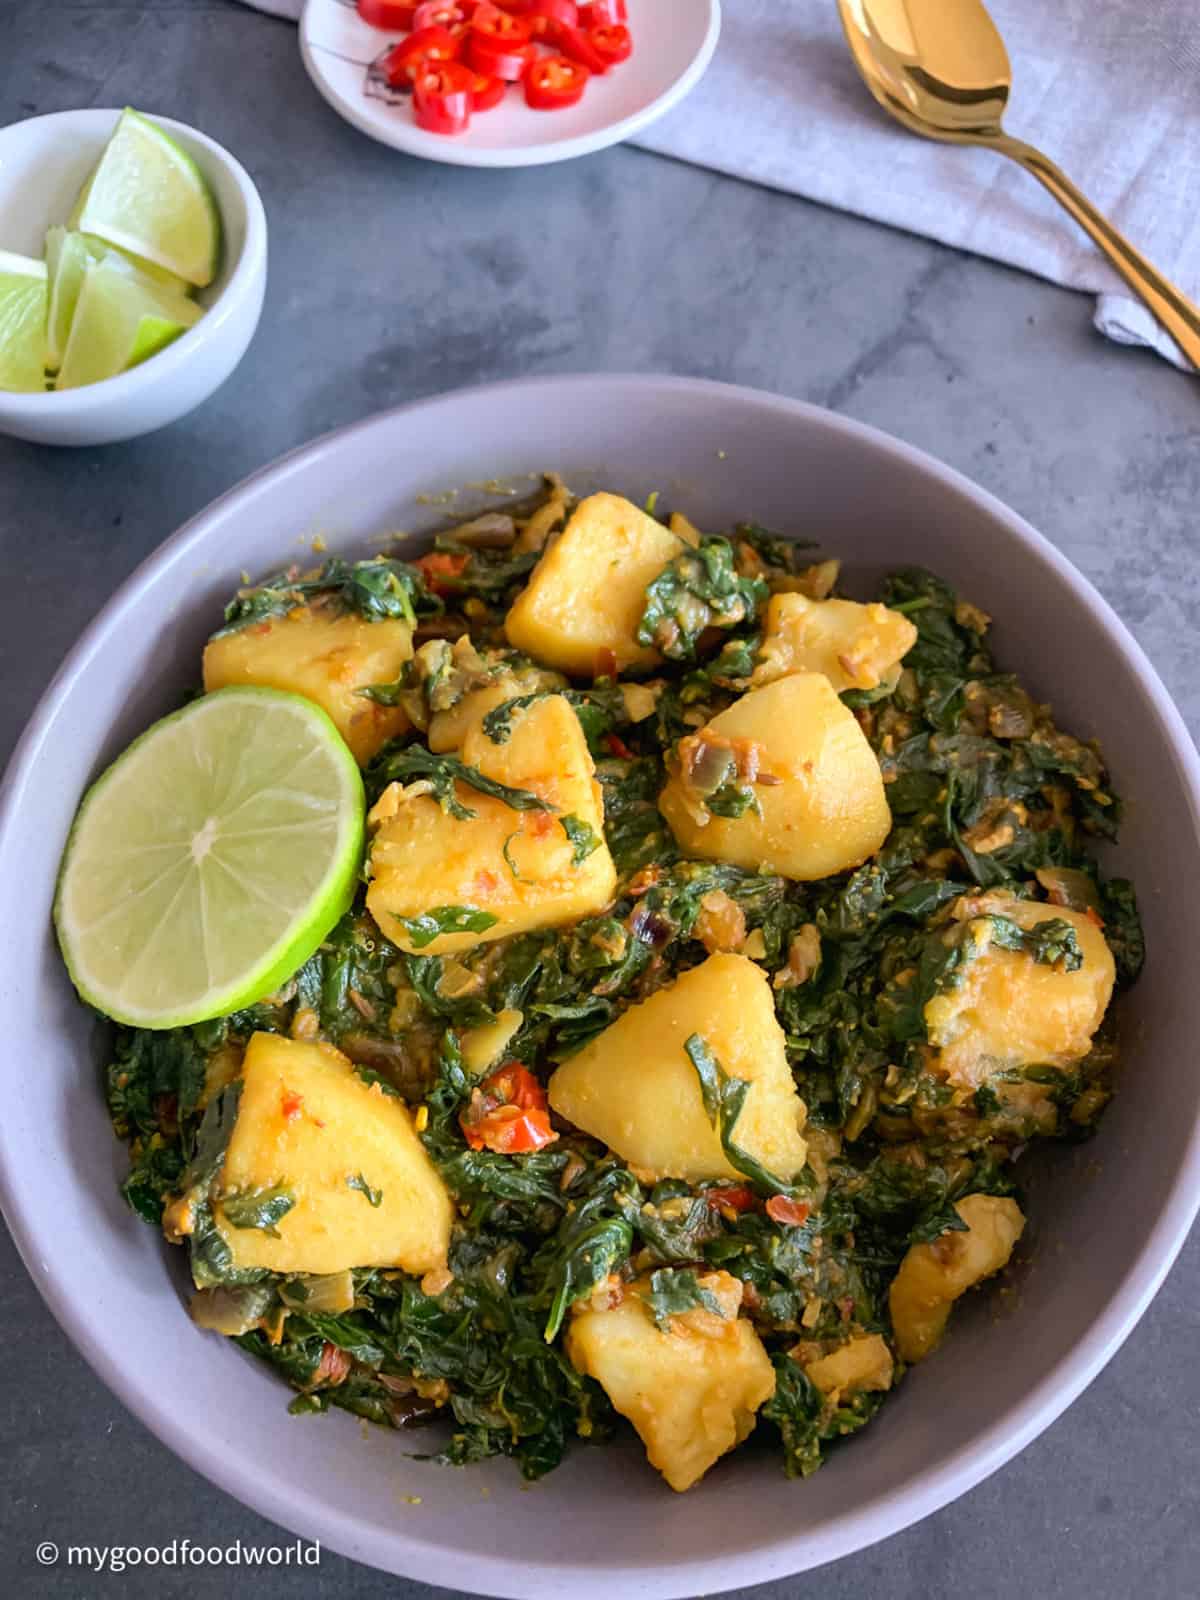 Cooked aloo palak sabzi placed in a round grey bowl with a cut piece of lemon as garnish.